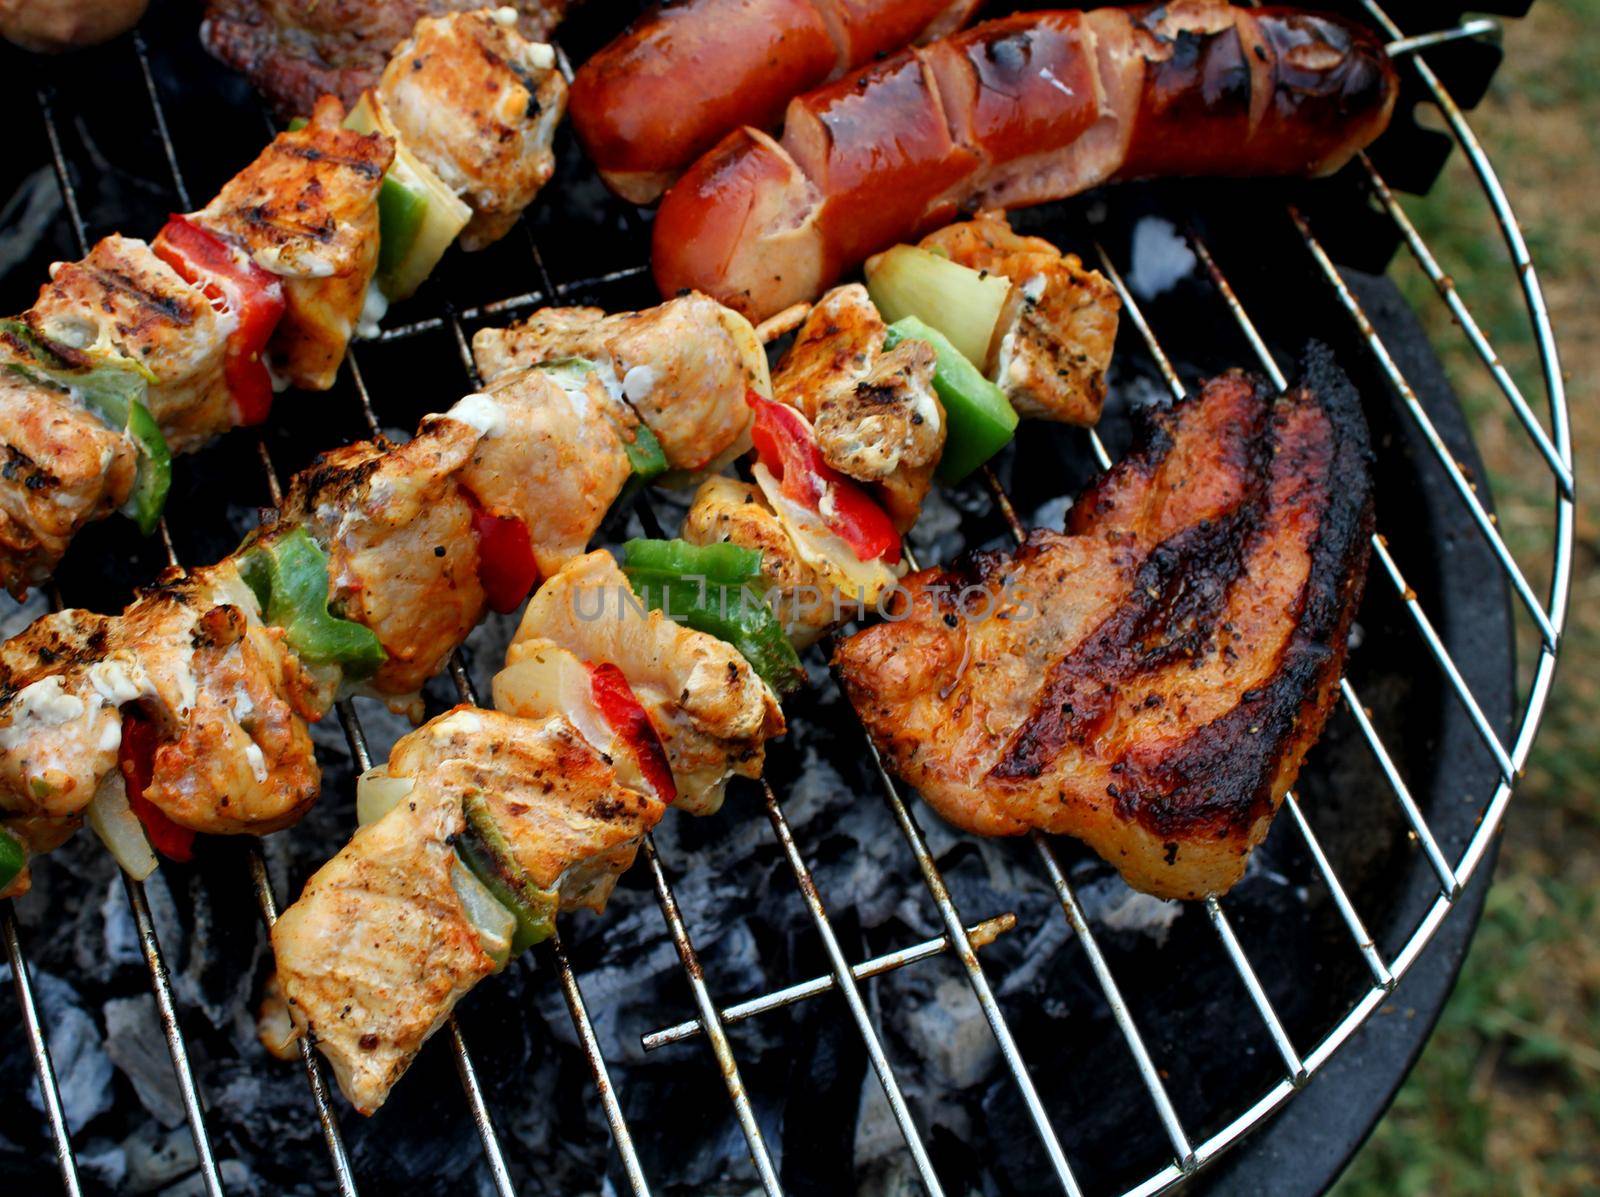 Meat and vegetables char-grilled